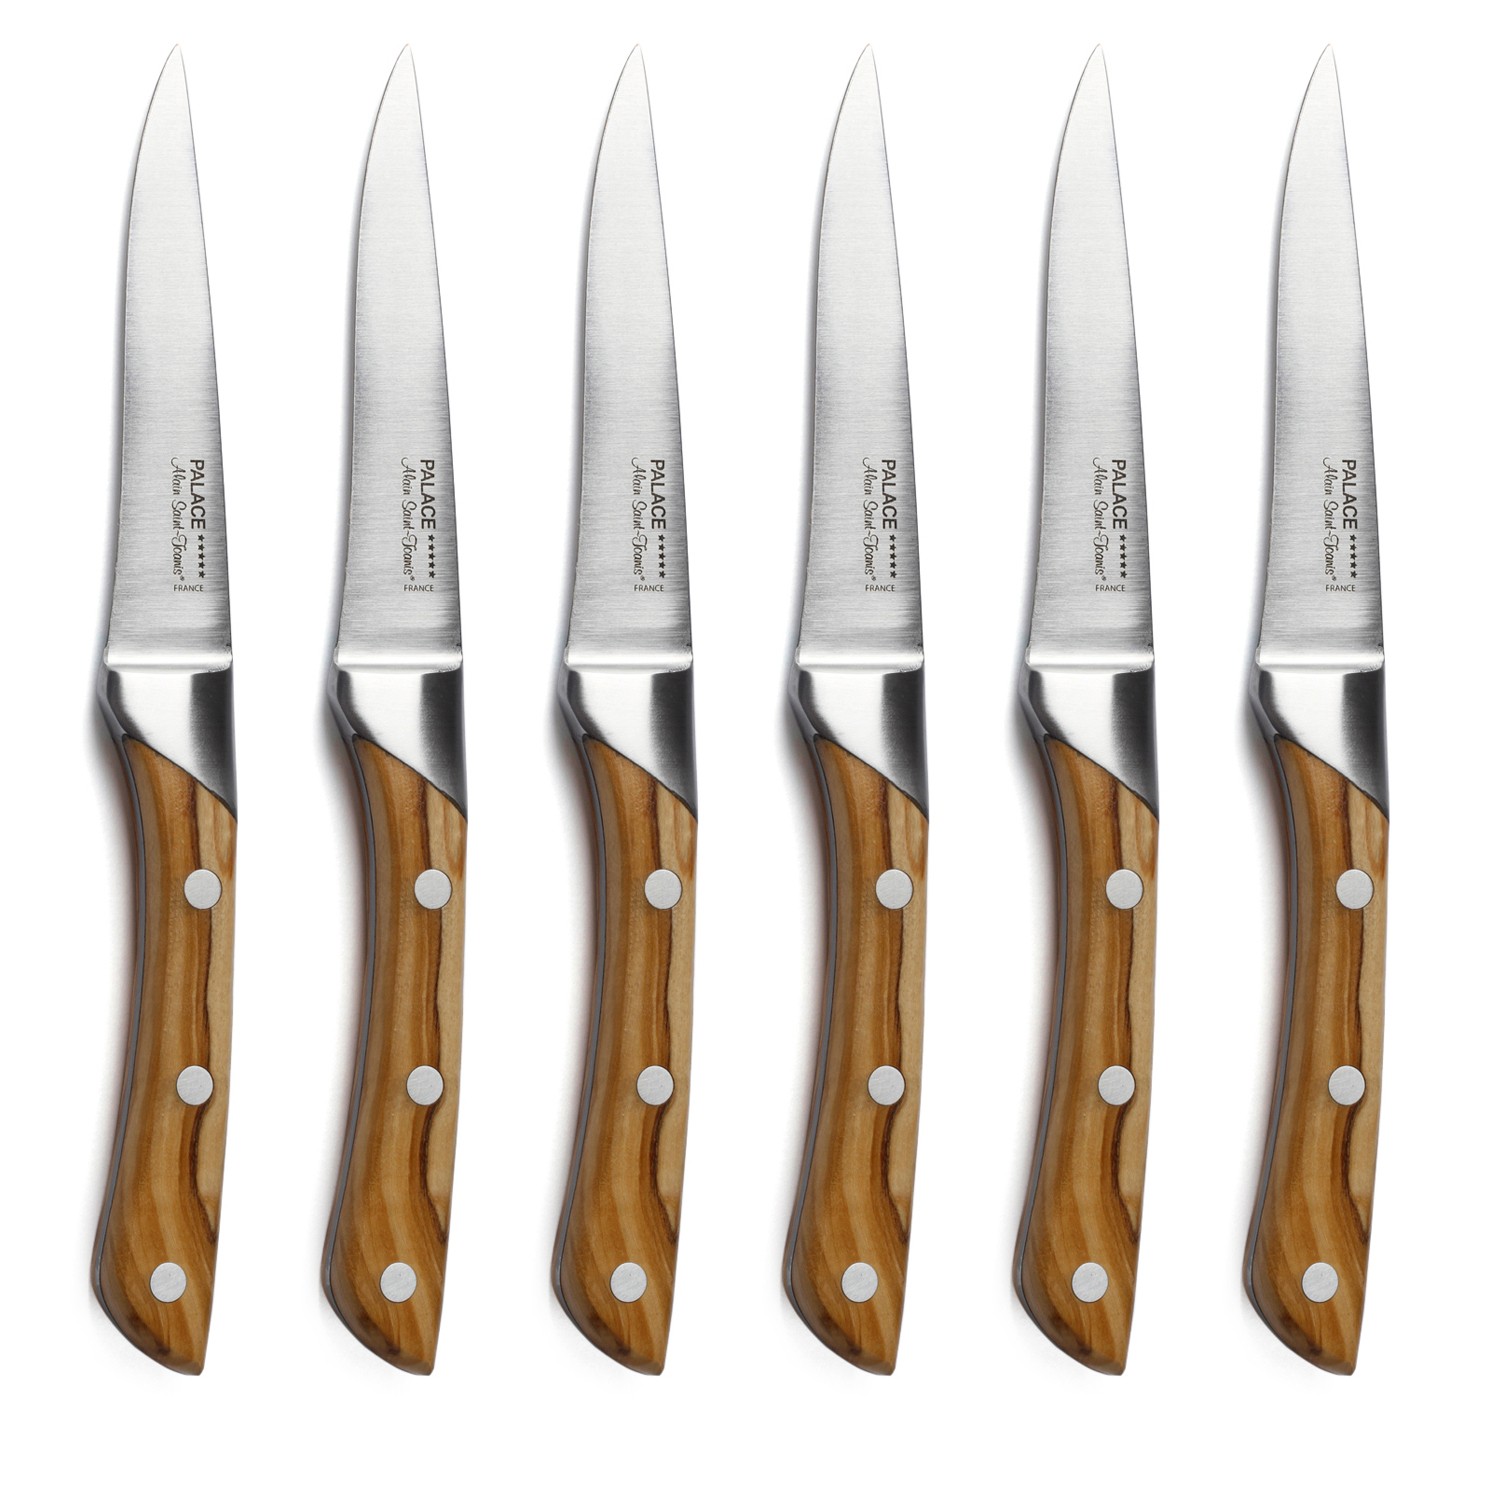 3 Steak Knives In A Wood Chest (Set of 6)